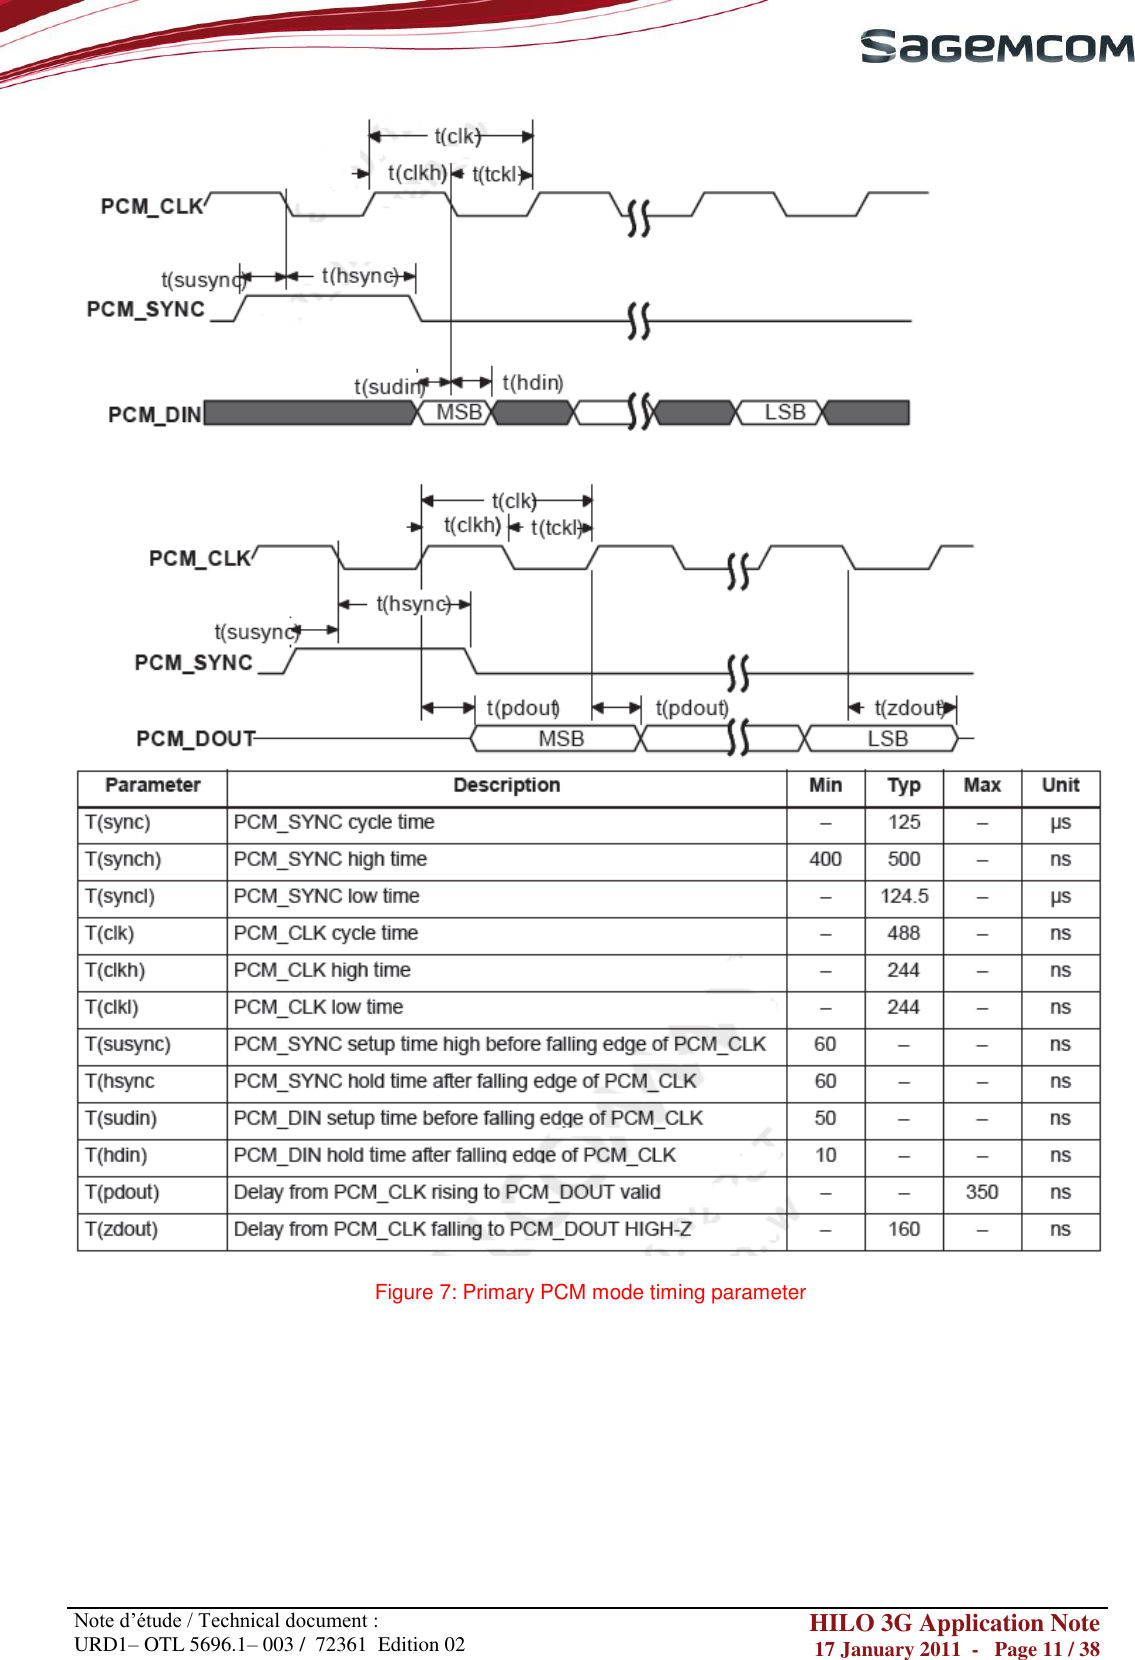       Note d‘étude / Technical document : URD1– OTL 5696.1– 003 /  72361  Edition 02 HILO 3G Application Note 17 January 2011  -   Page 11 / 38       Figure 7: Primary PCM mode timing parameter          